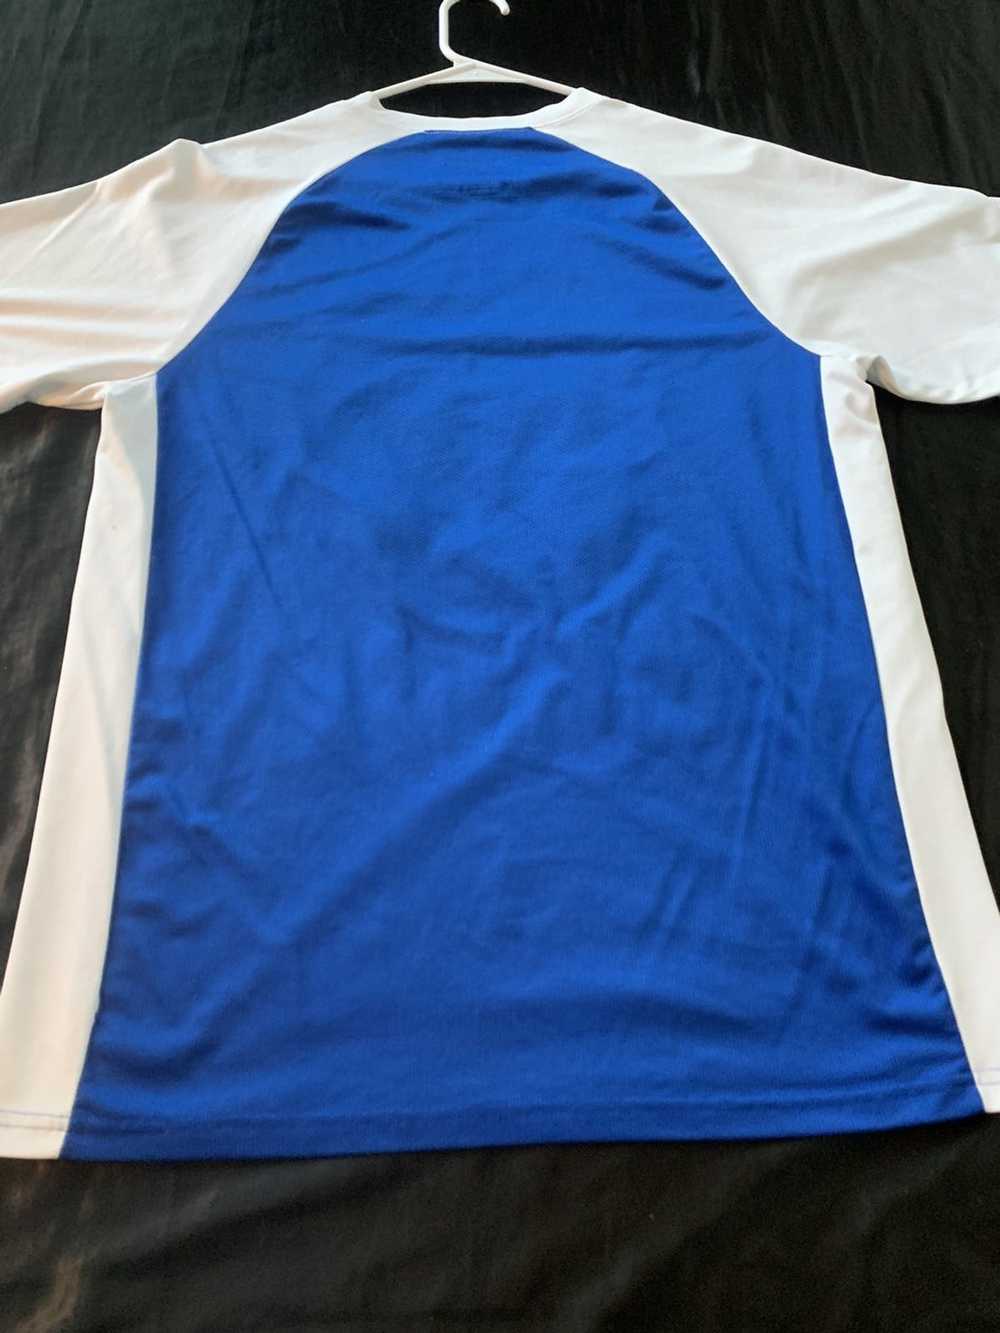 Round Two Round Two Soccer jersey (MERCH) - image 4